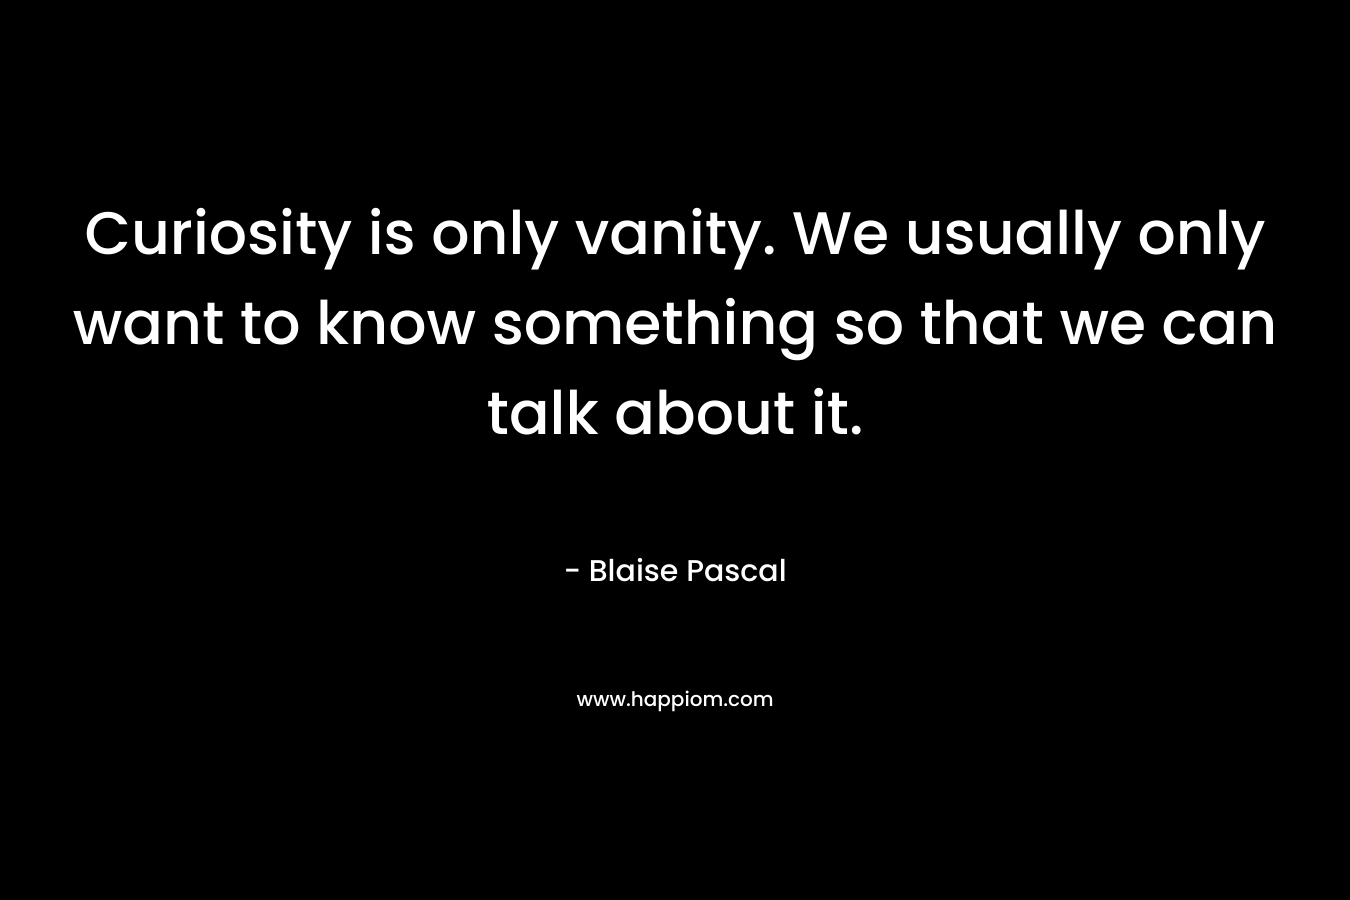 Curiosity is only vanity. We usually only want to know something so that we can talk about it. – Blaise Pascal